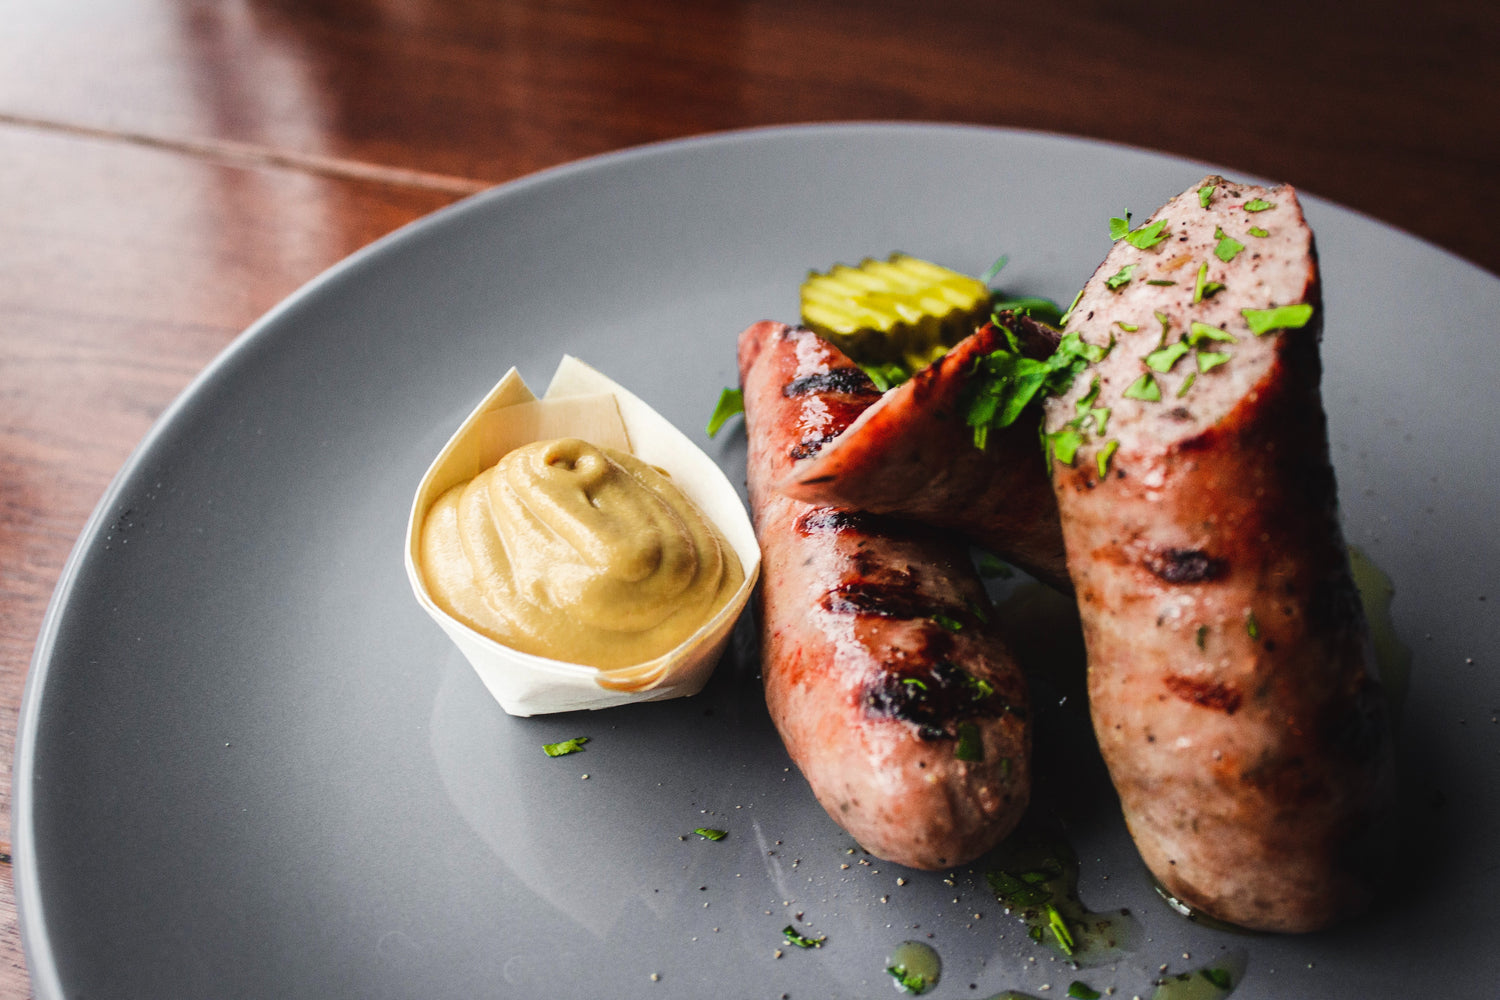 Pork sausage on blue plate with side of mustard 